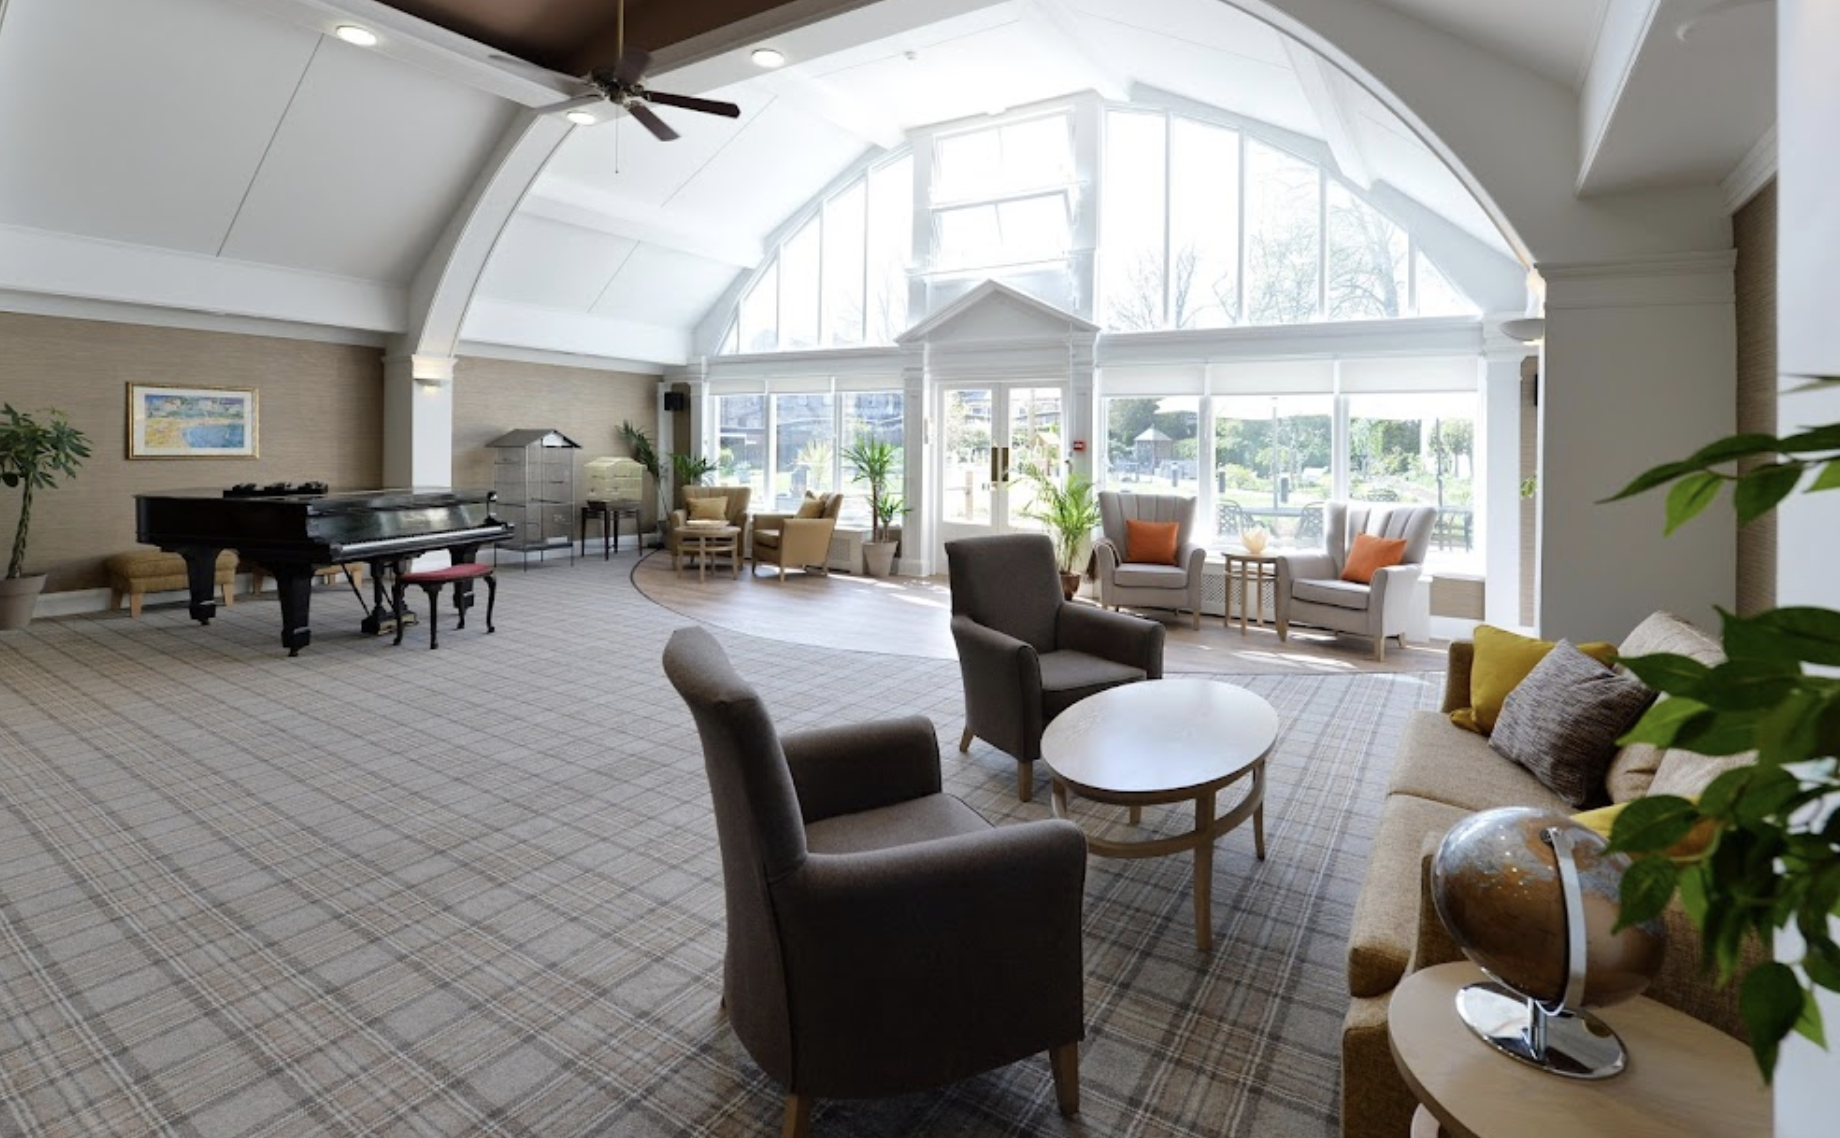 Bupa - Southlands care home 2